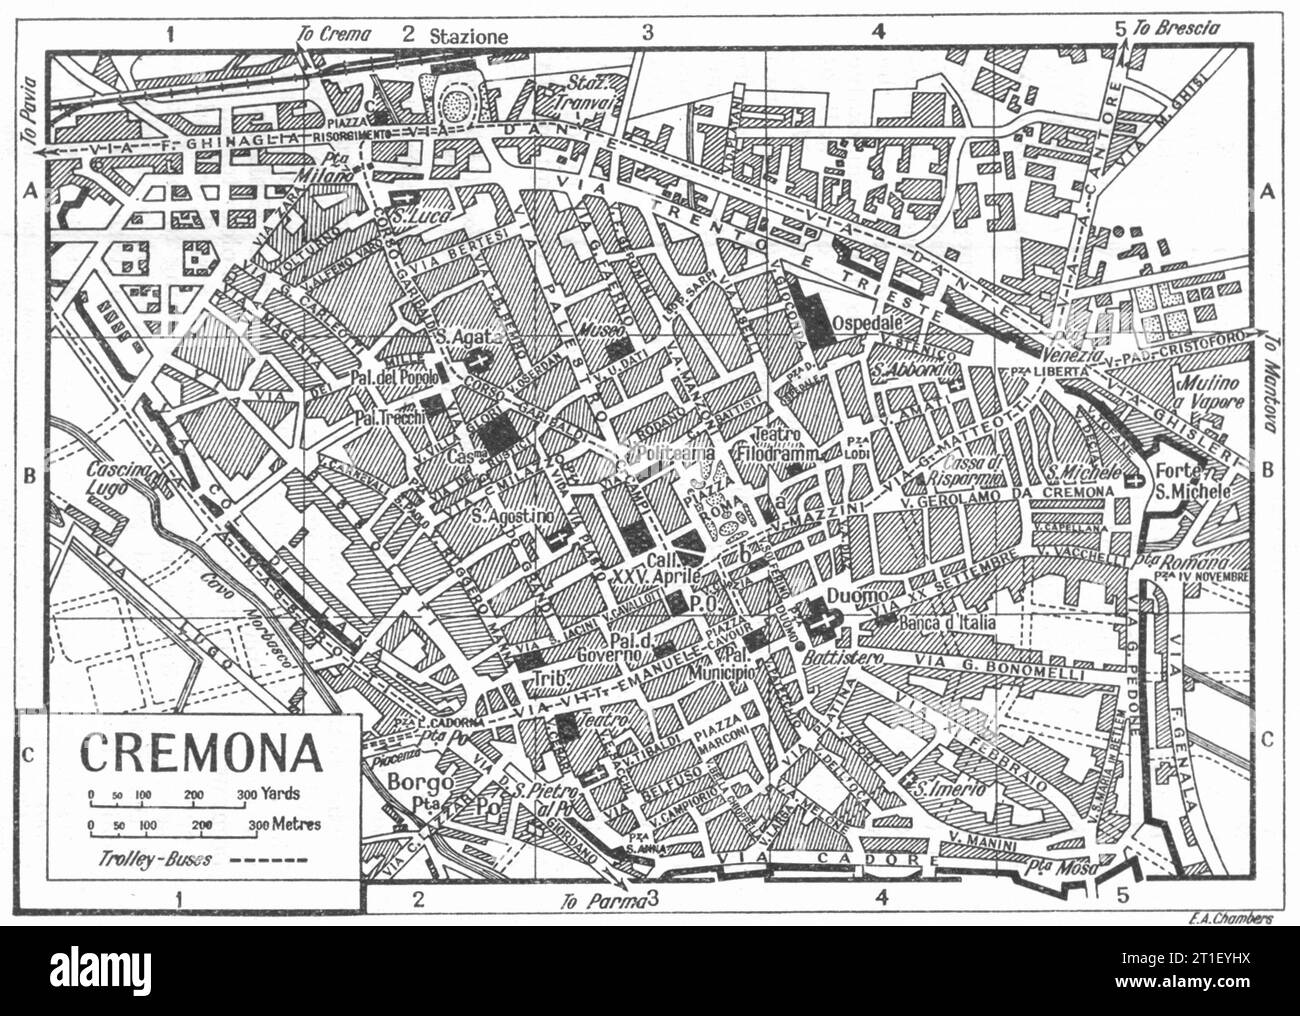 CREMONA town/city plan. Italy 1953 old vintage map chart Stock Photo